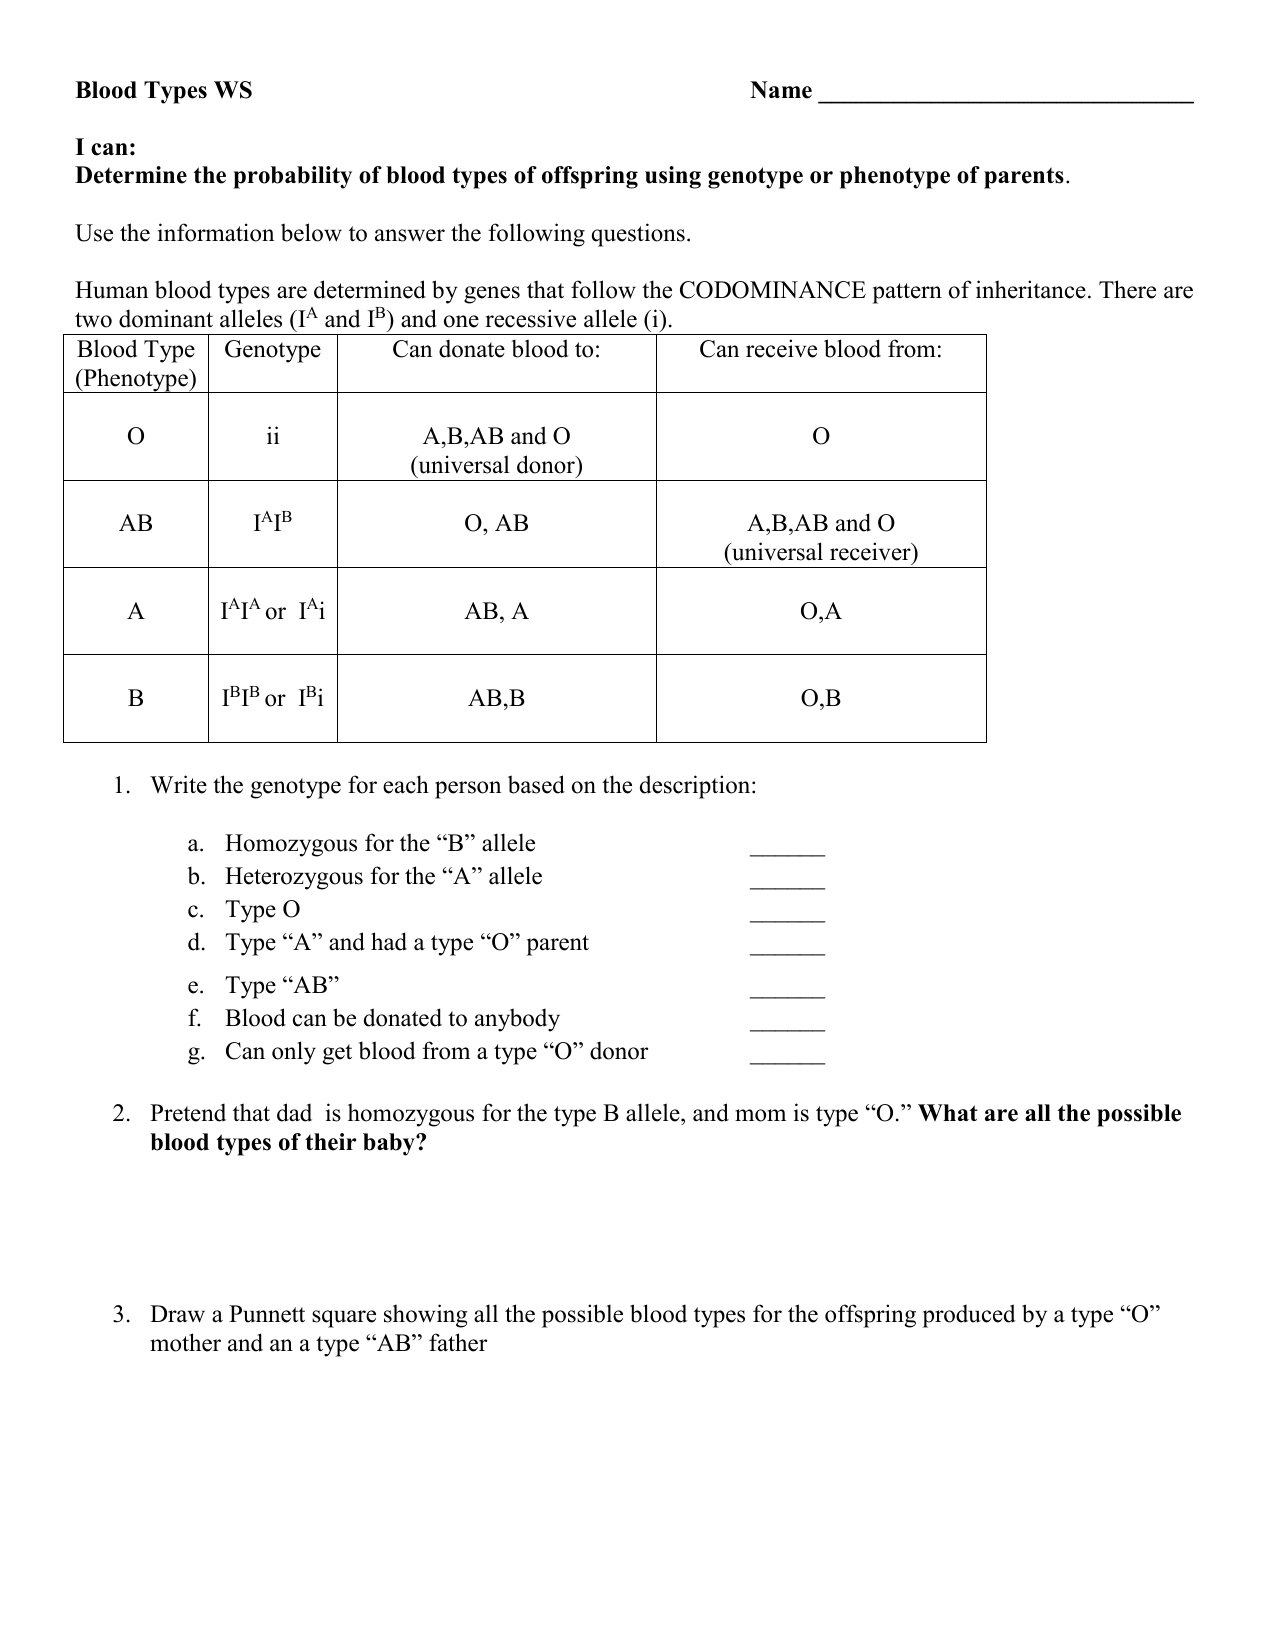 codominance-worksheet-blood-types-answer-key-excelguider